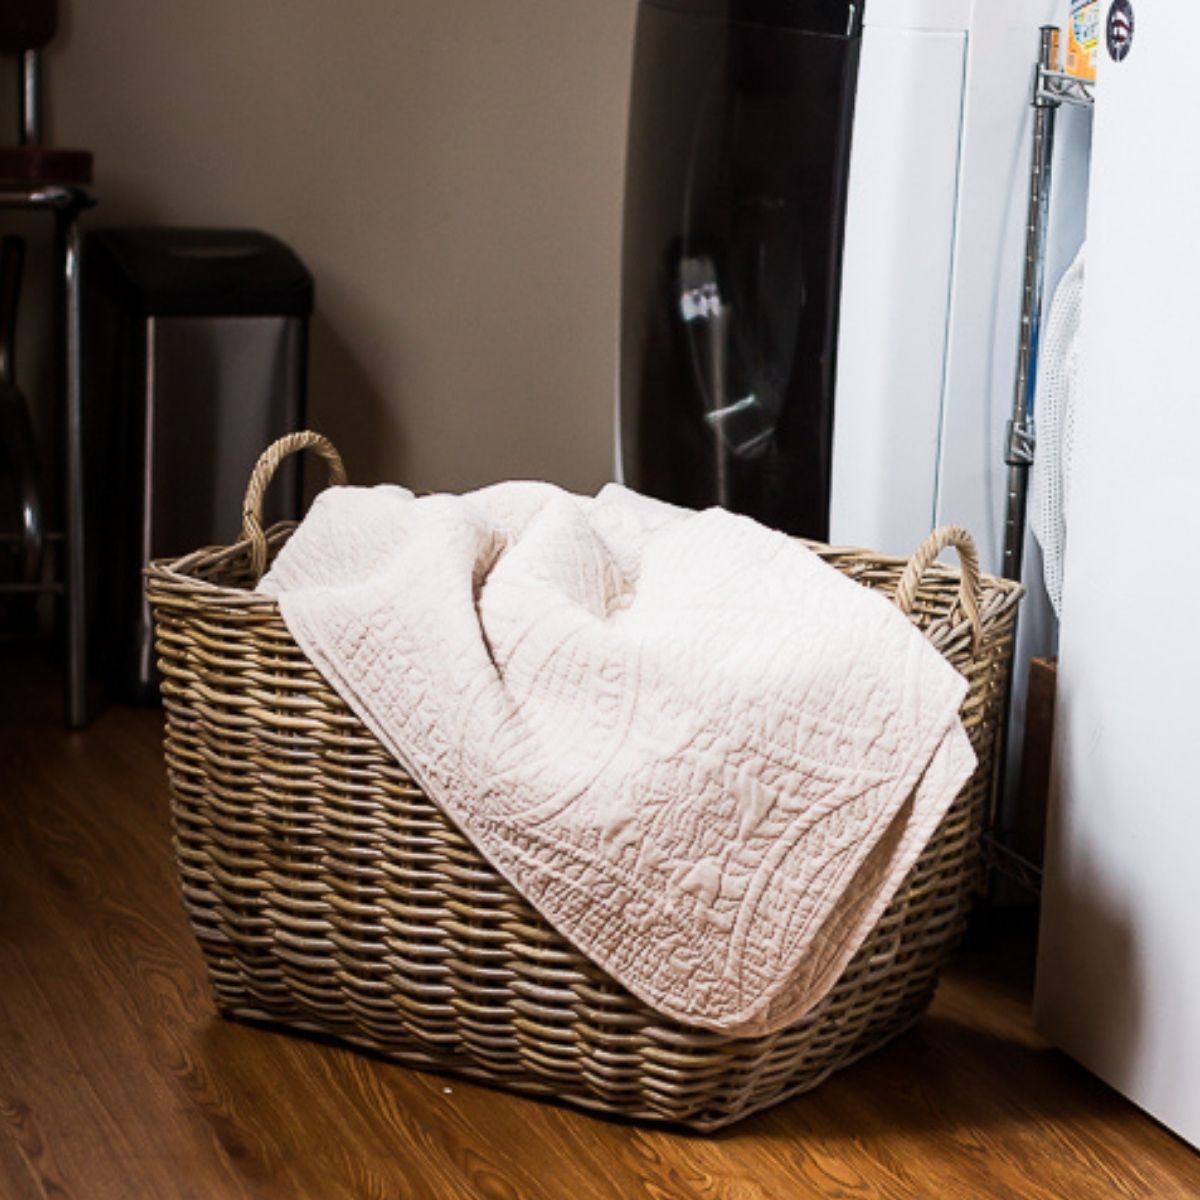 Laundry Room Update on a Budget